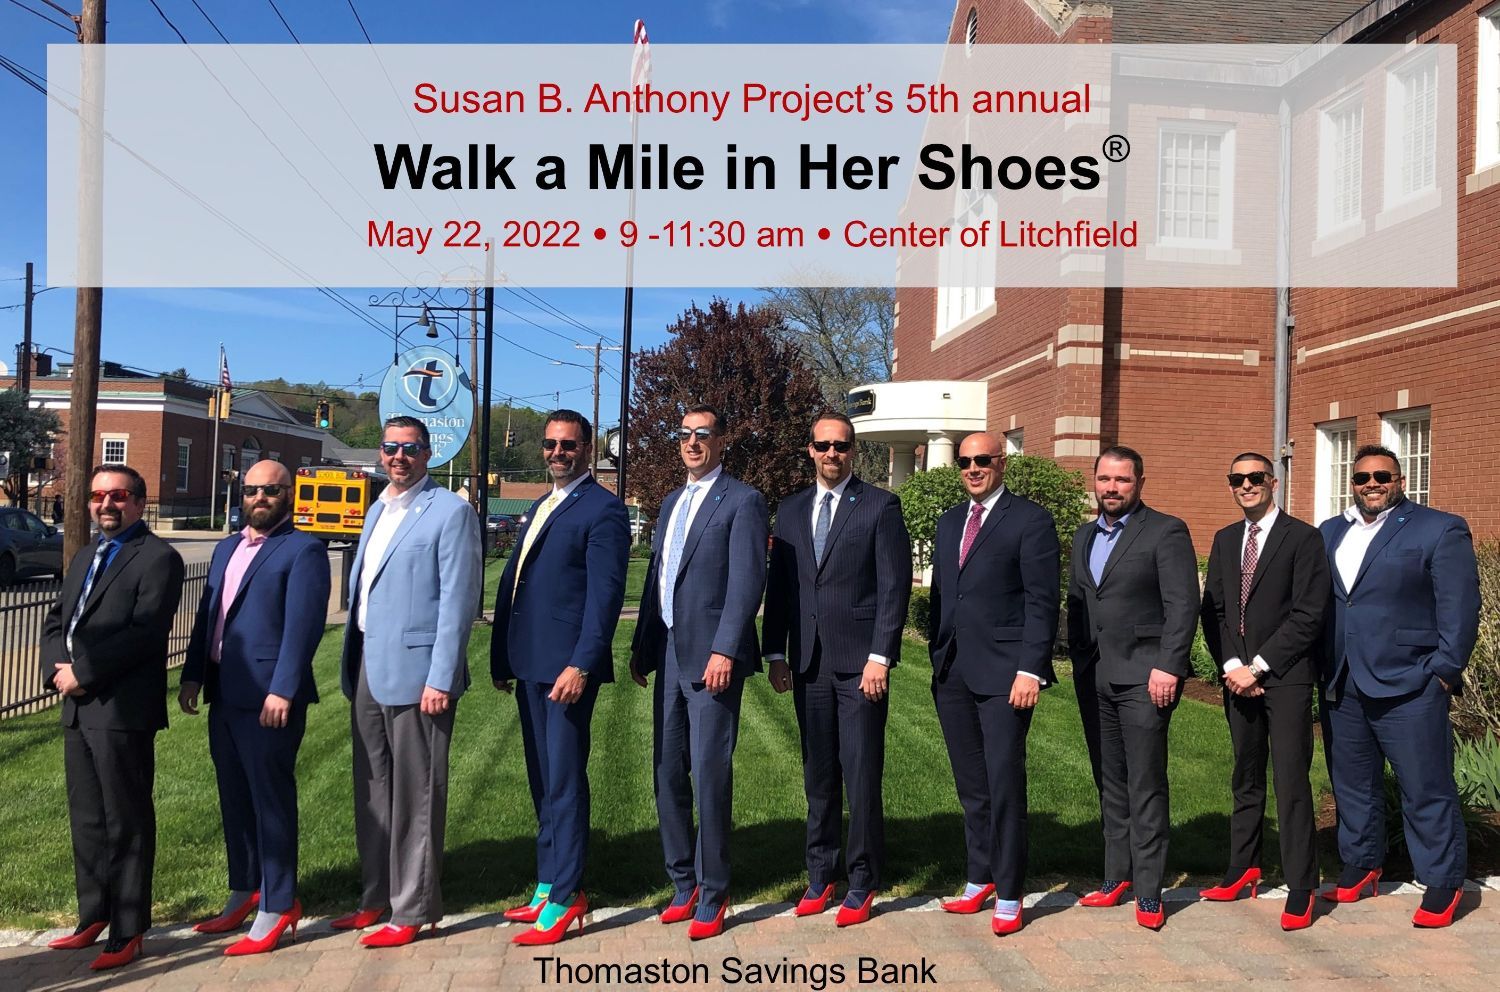 Walk a Mile in Her Shoes, Litchfield, CT May 22,2022